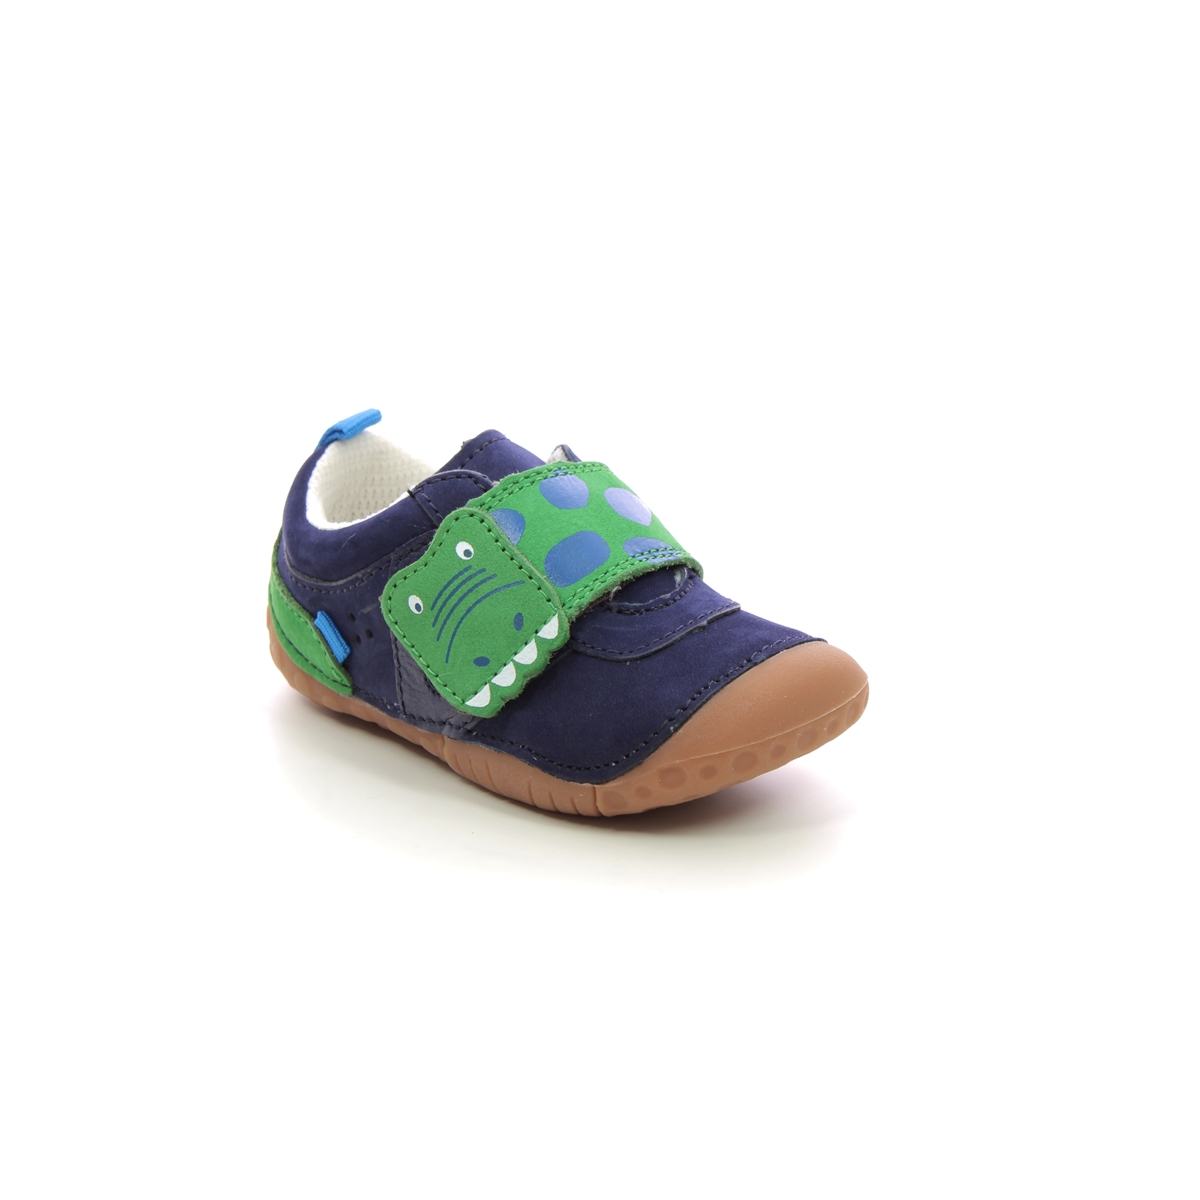 Start Rite - Little Mate 1V In Navy Leather 0819-97G In Size 2 In Plain Navy Leather Boys First And Toddler Shoes  In Navy Leather For kids